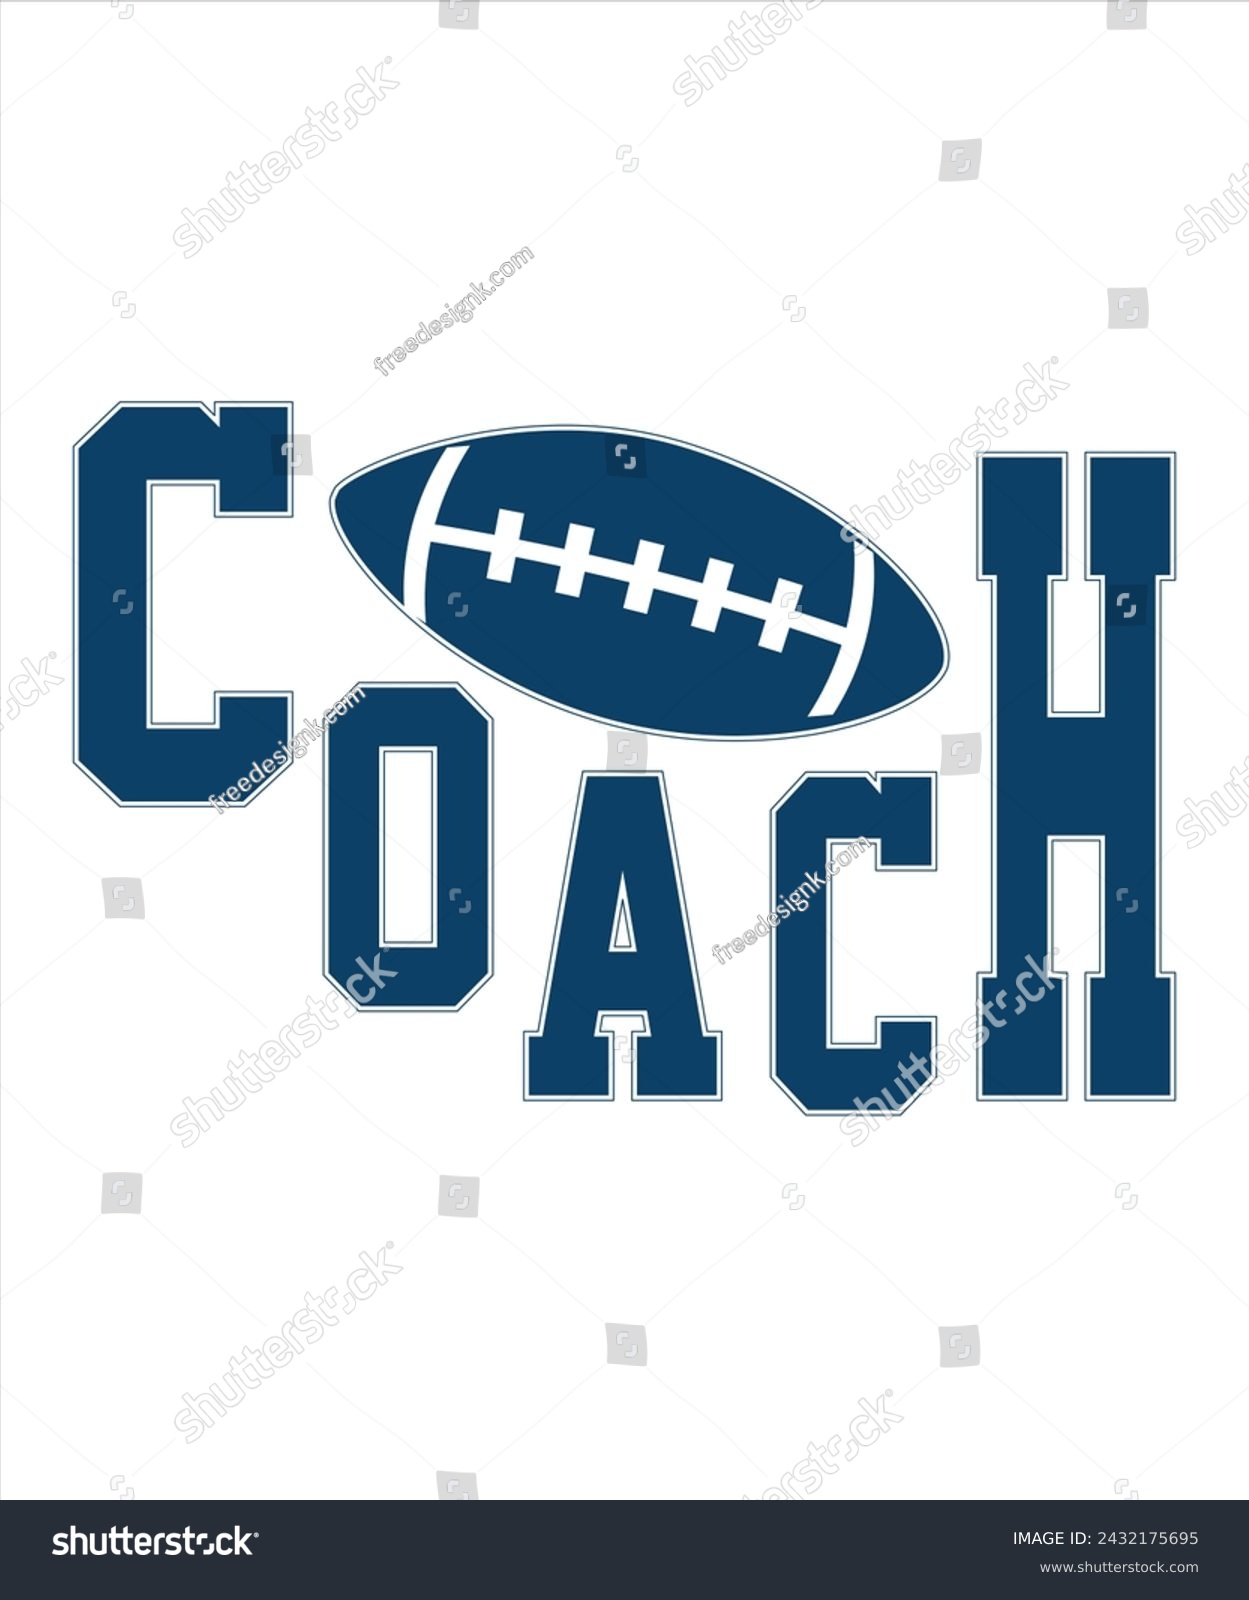 SVG of Coach football for typography tshirt design free Download.eps
 svg